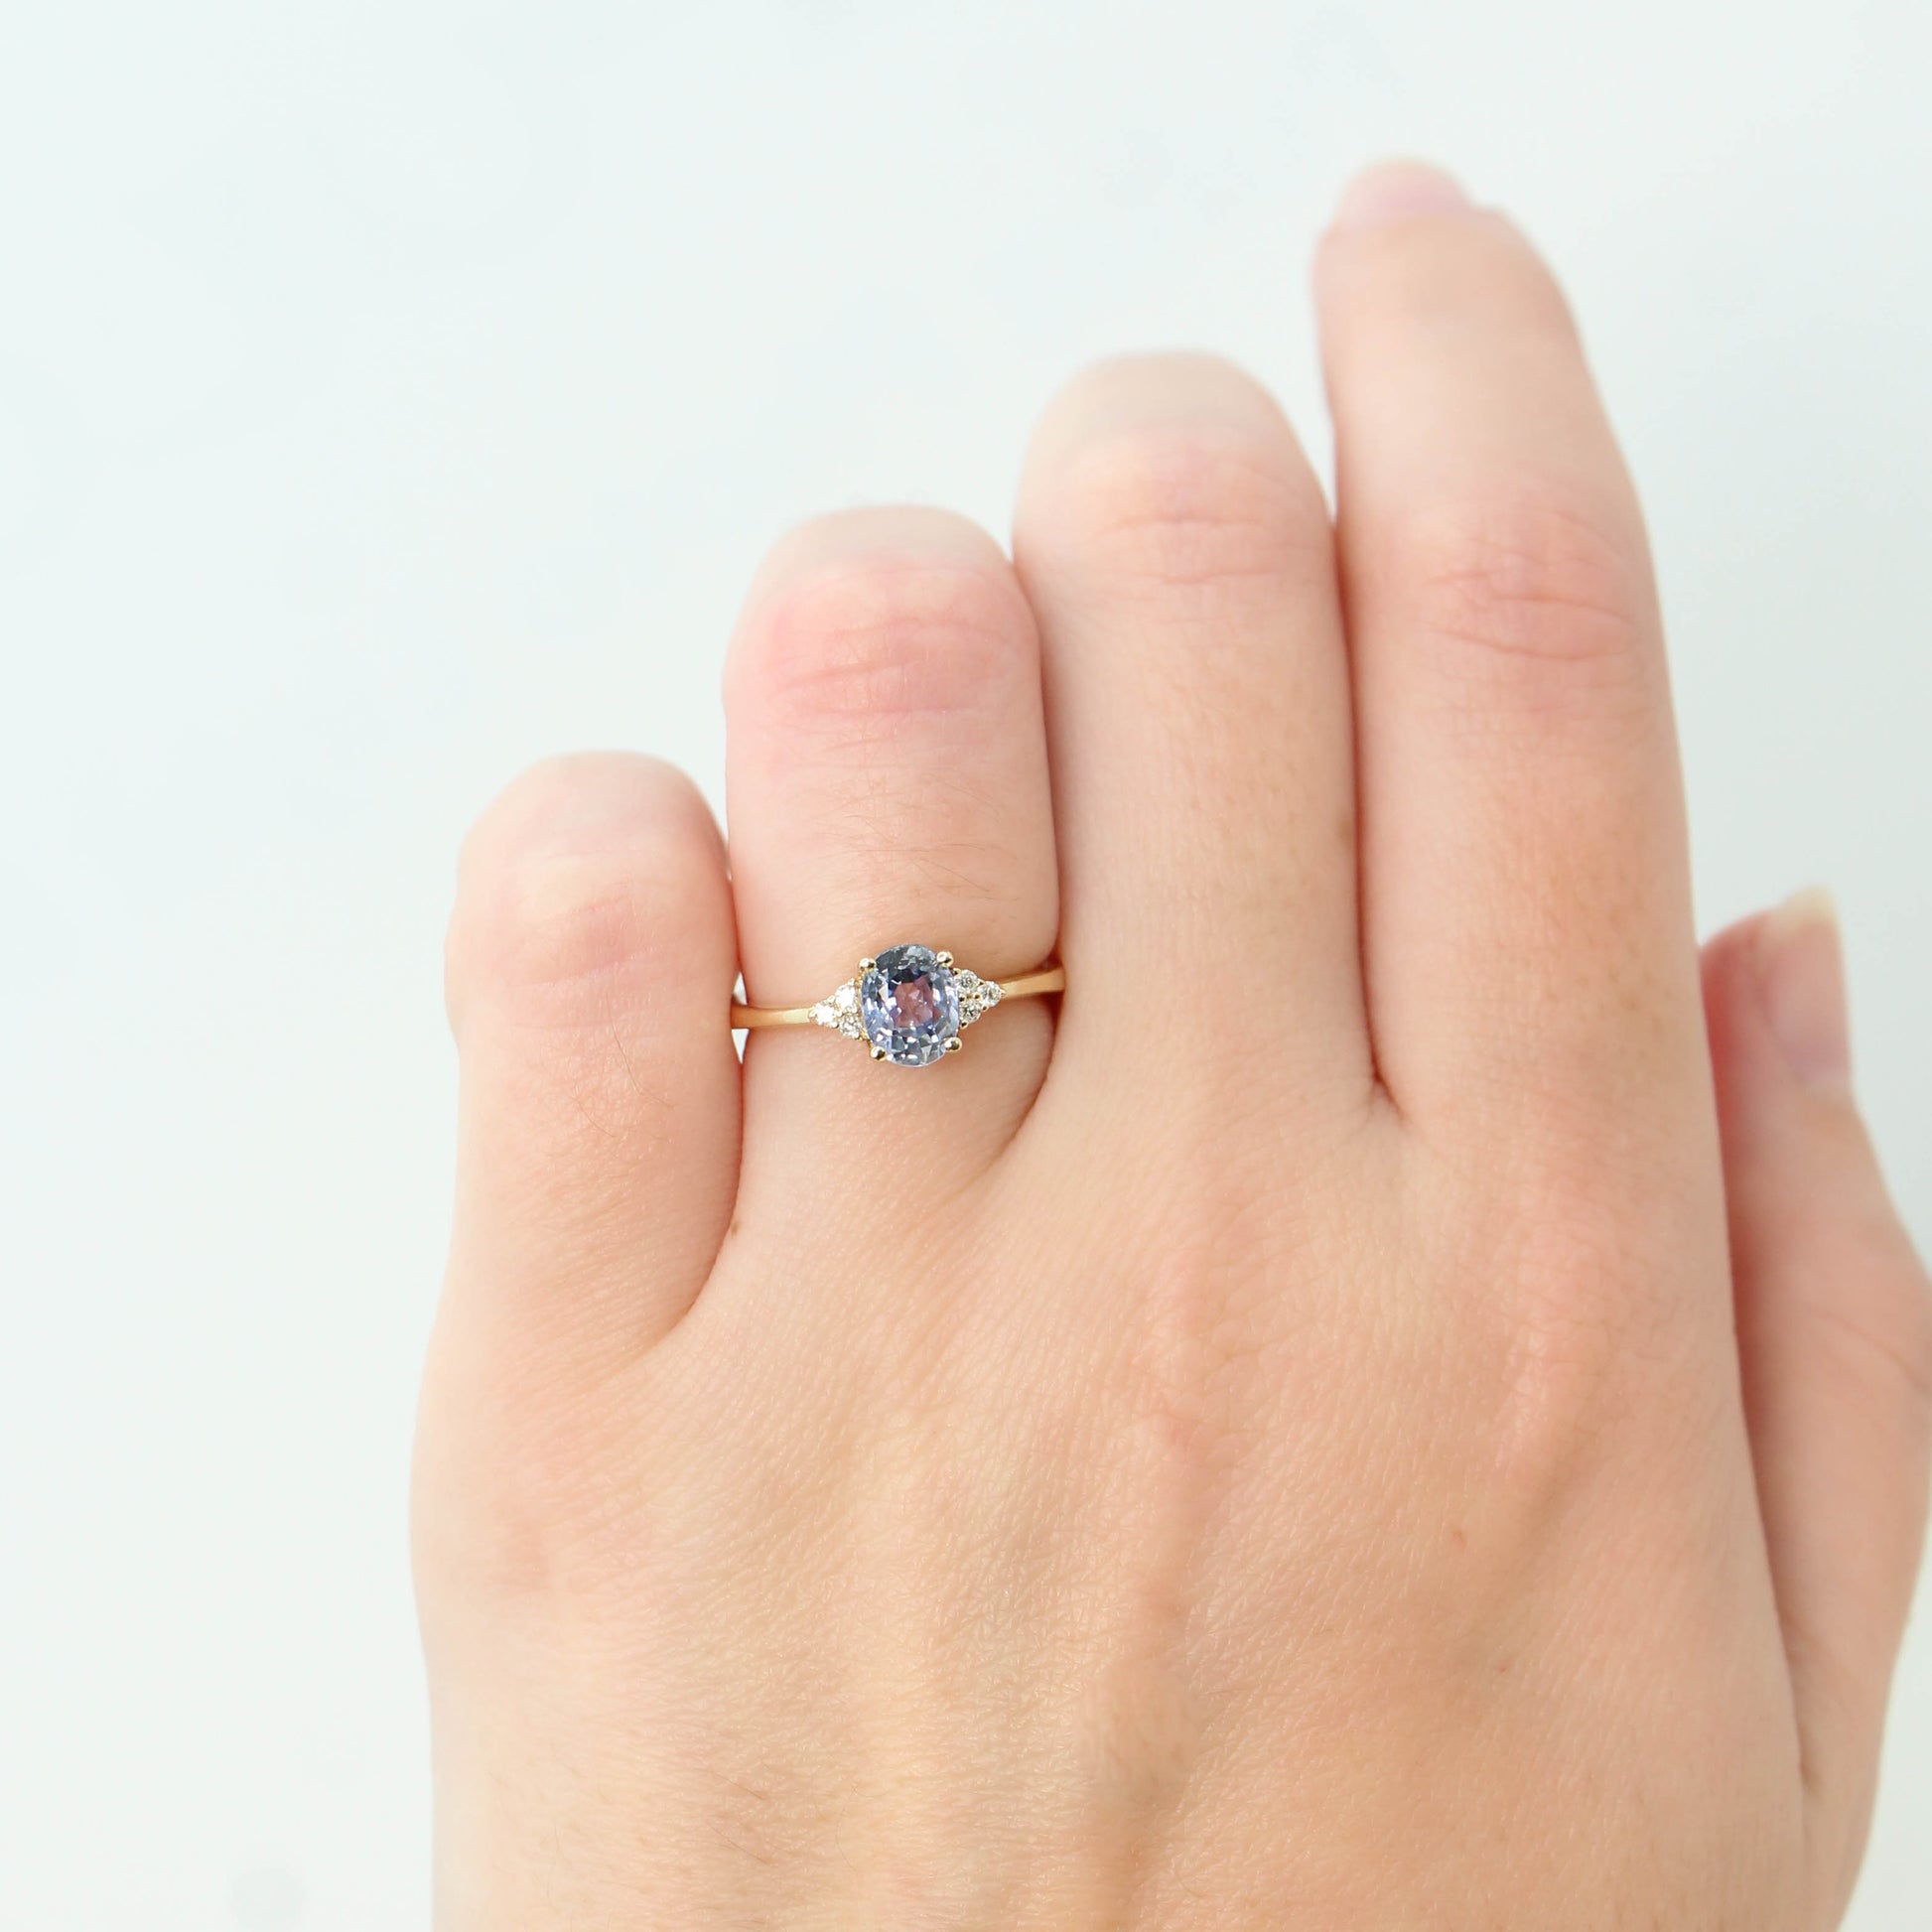 Imogene Ring with a 1.09 Carat Light Blue Sapphire and Accent Diamonds in 14k Yellow Gold - Ready to Size and Ship - Midwinter Co. Alternative Bridal Rings and Modern Fine Jewelry